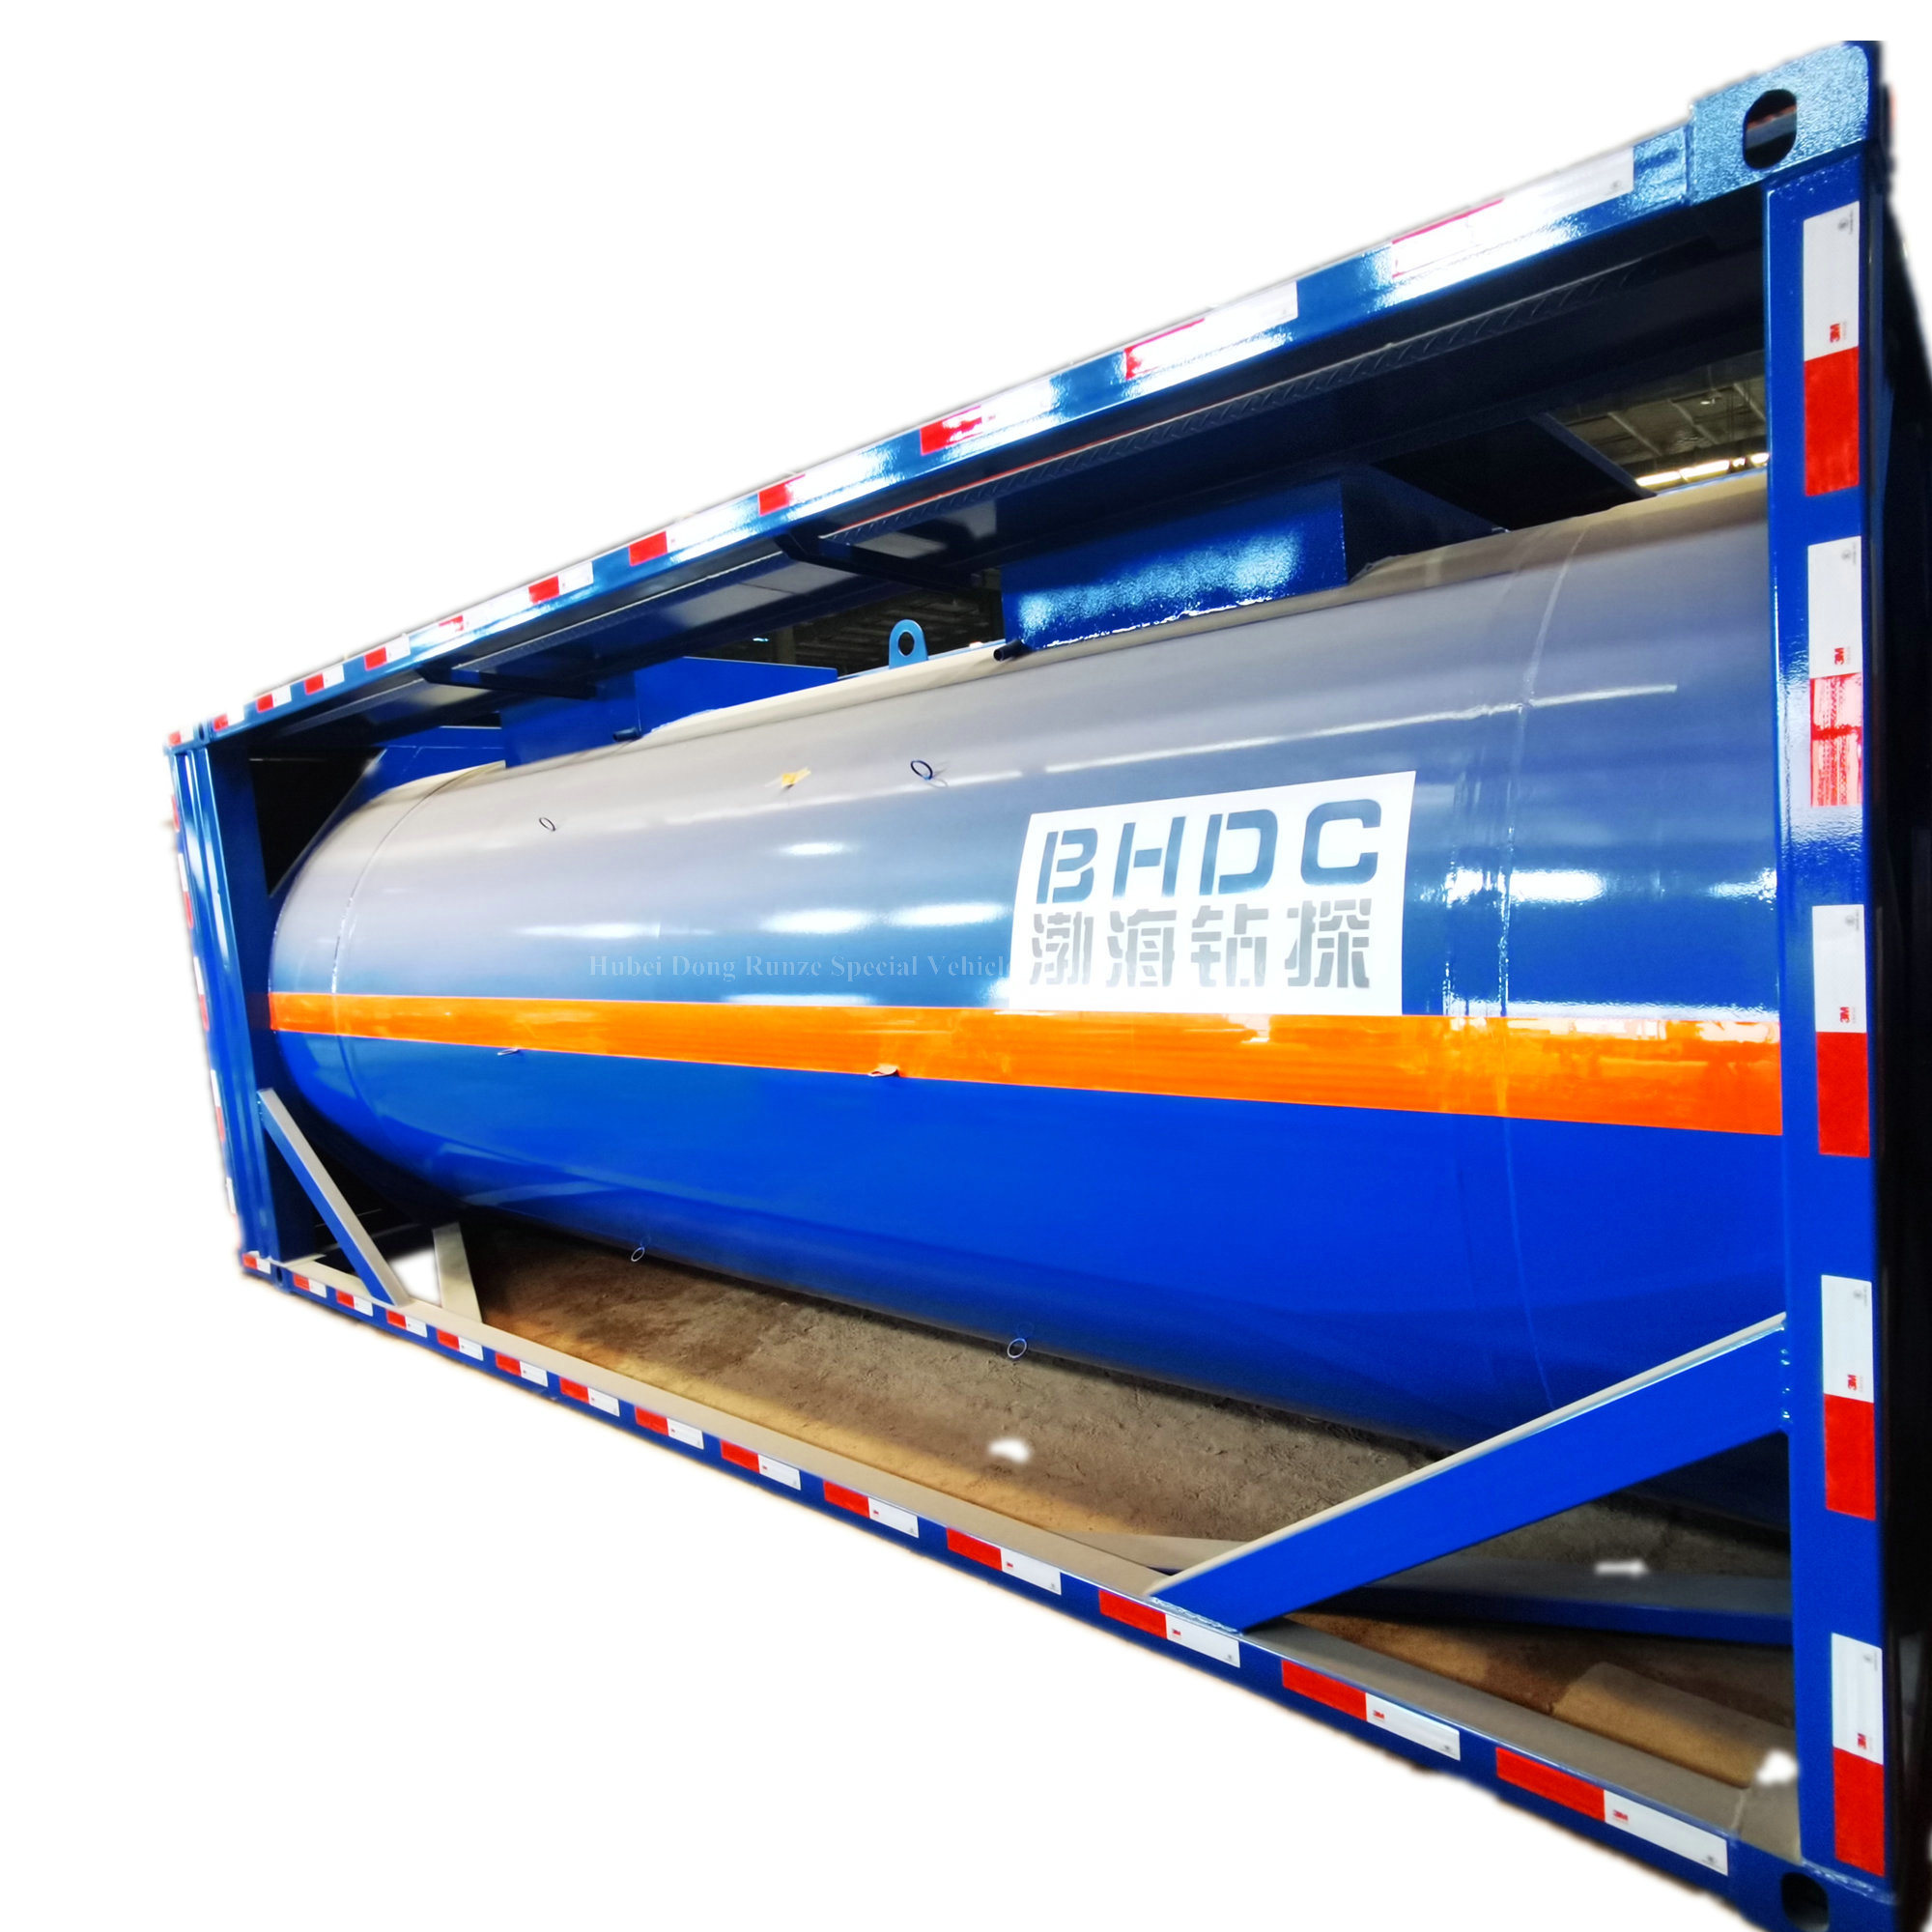 Customized LDPE Lined 20FT Container Tanks for Storage and Transport 20KL Hydrochloric Acid